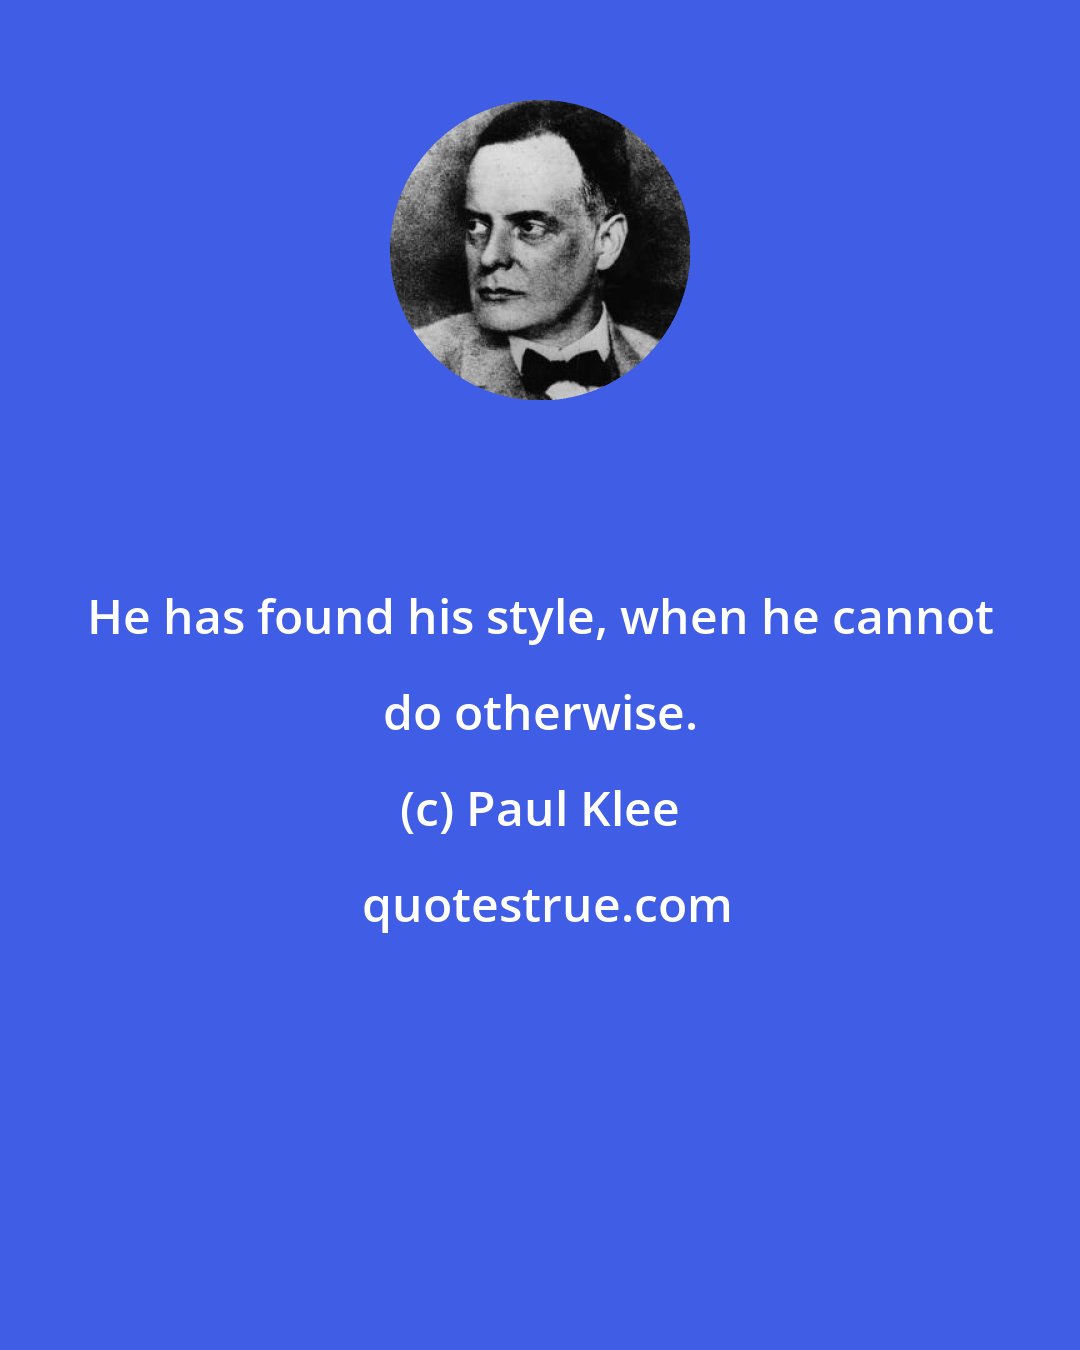 Paul Klee: He has found his style, when he cannot do otherwise.